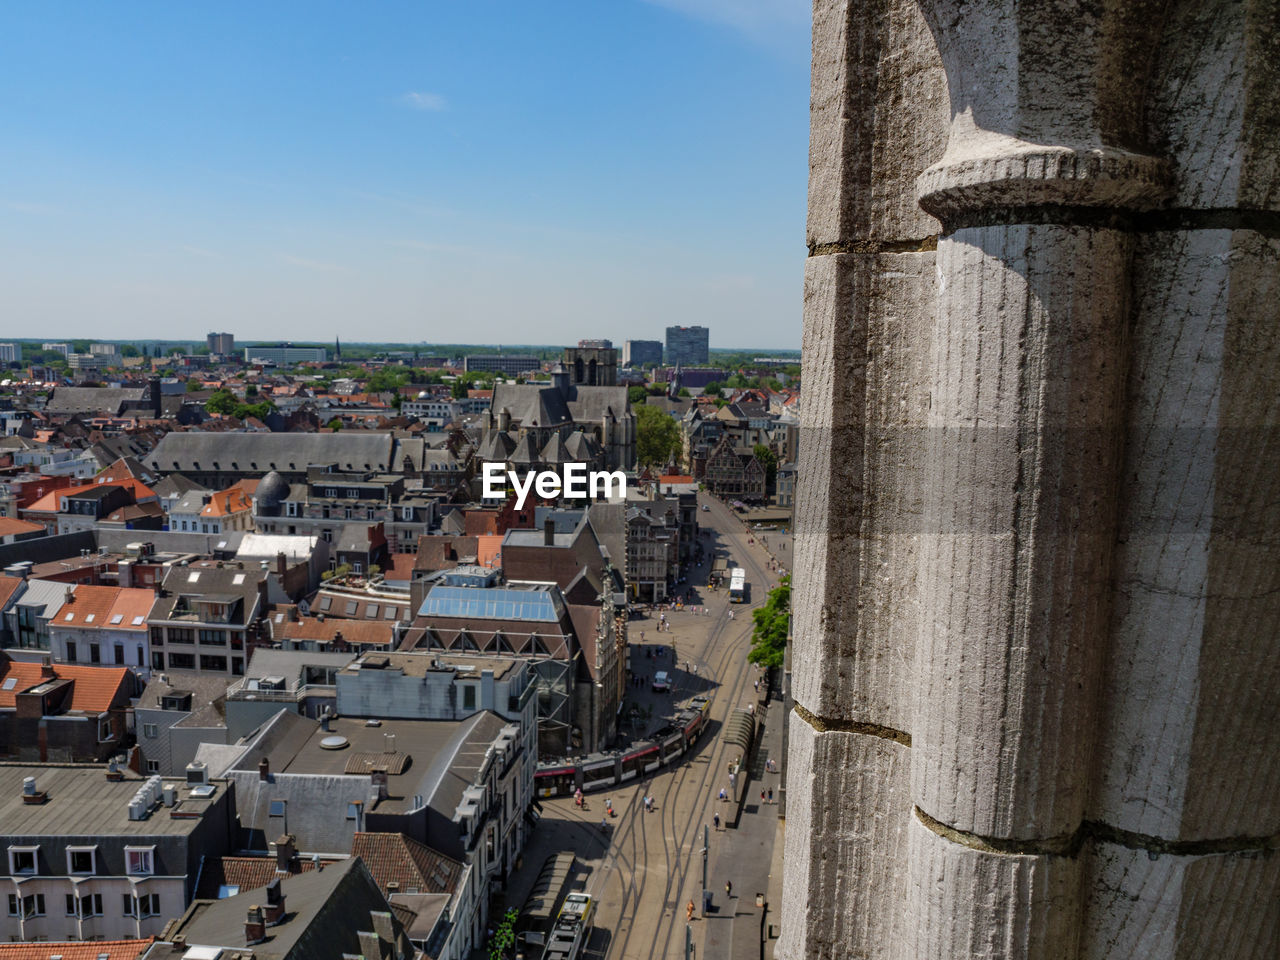 Gent from above